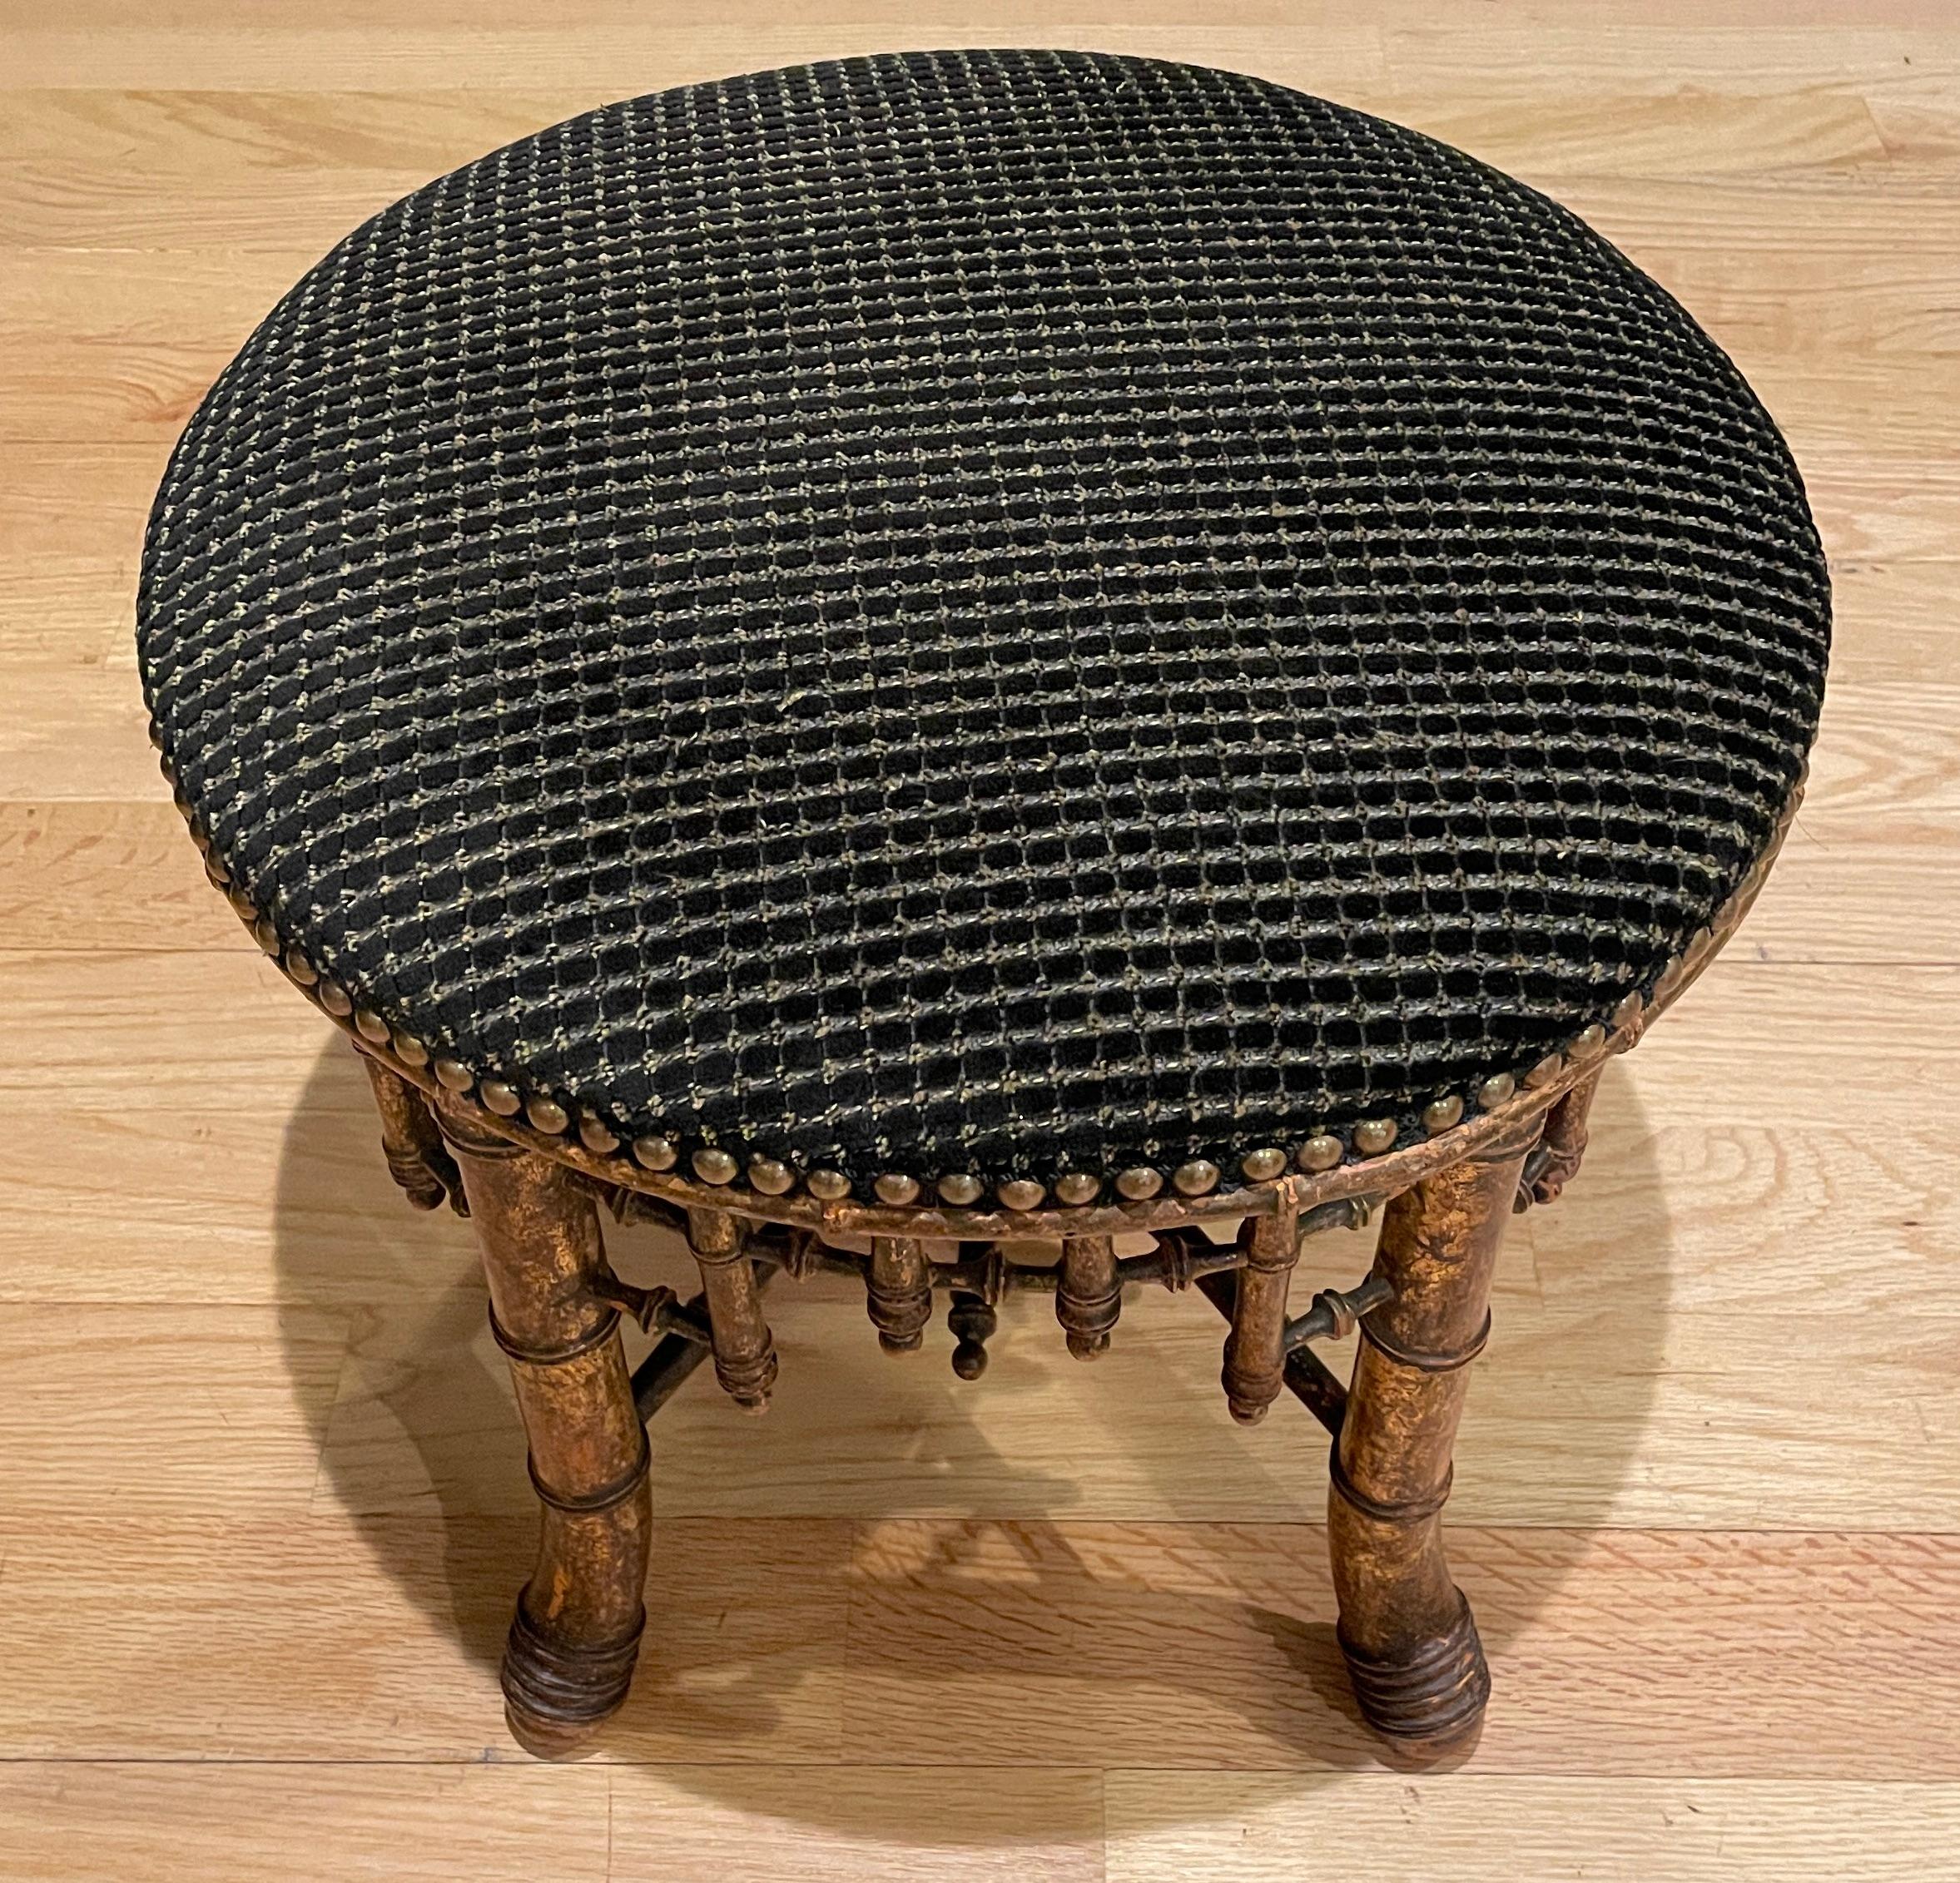 Aesthetic Movement Aesthetics Movement Antique Faux Bamboo Stool For Sale